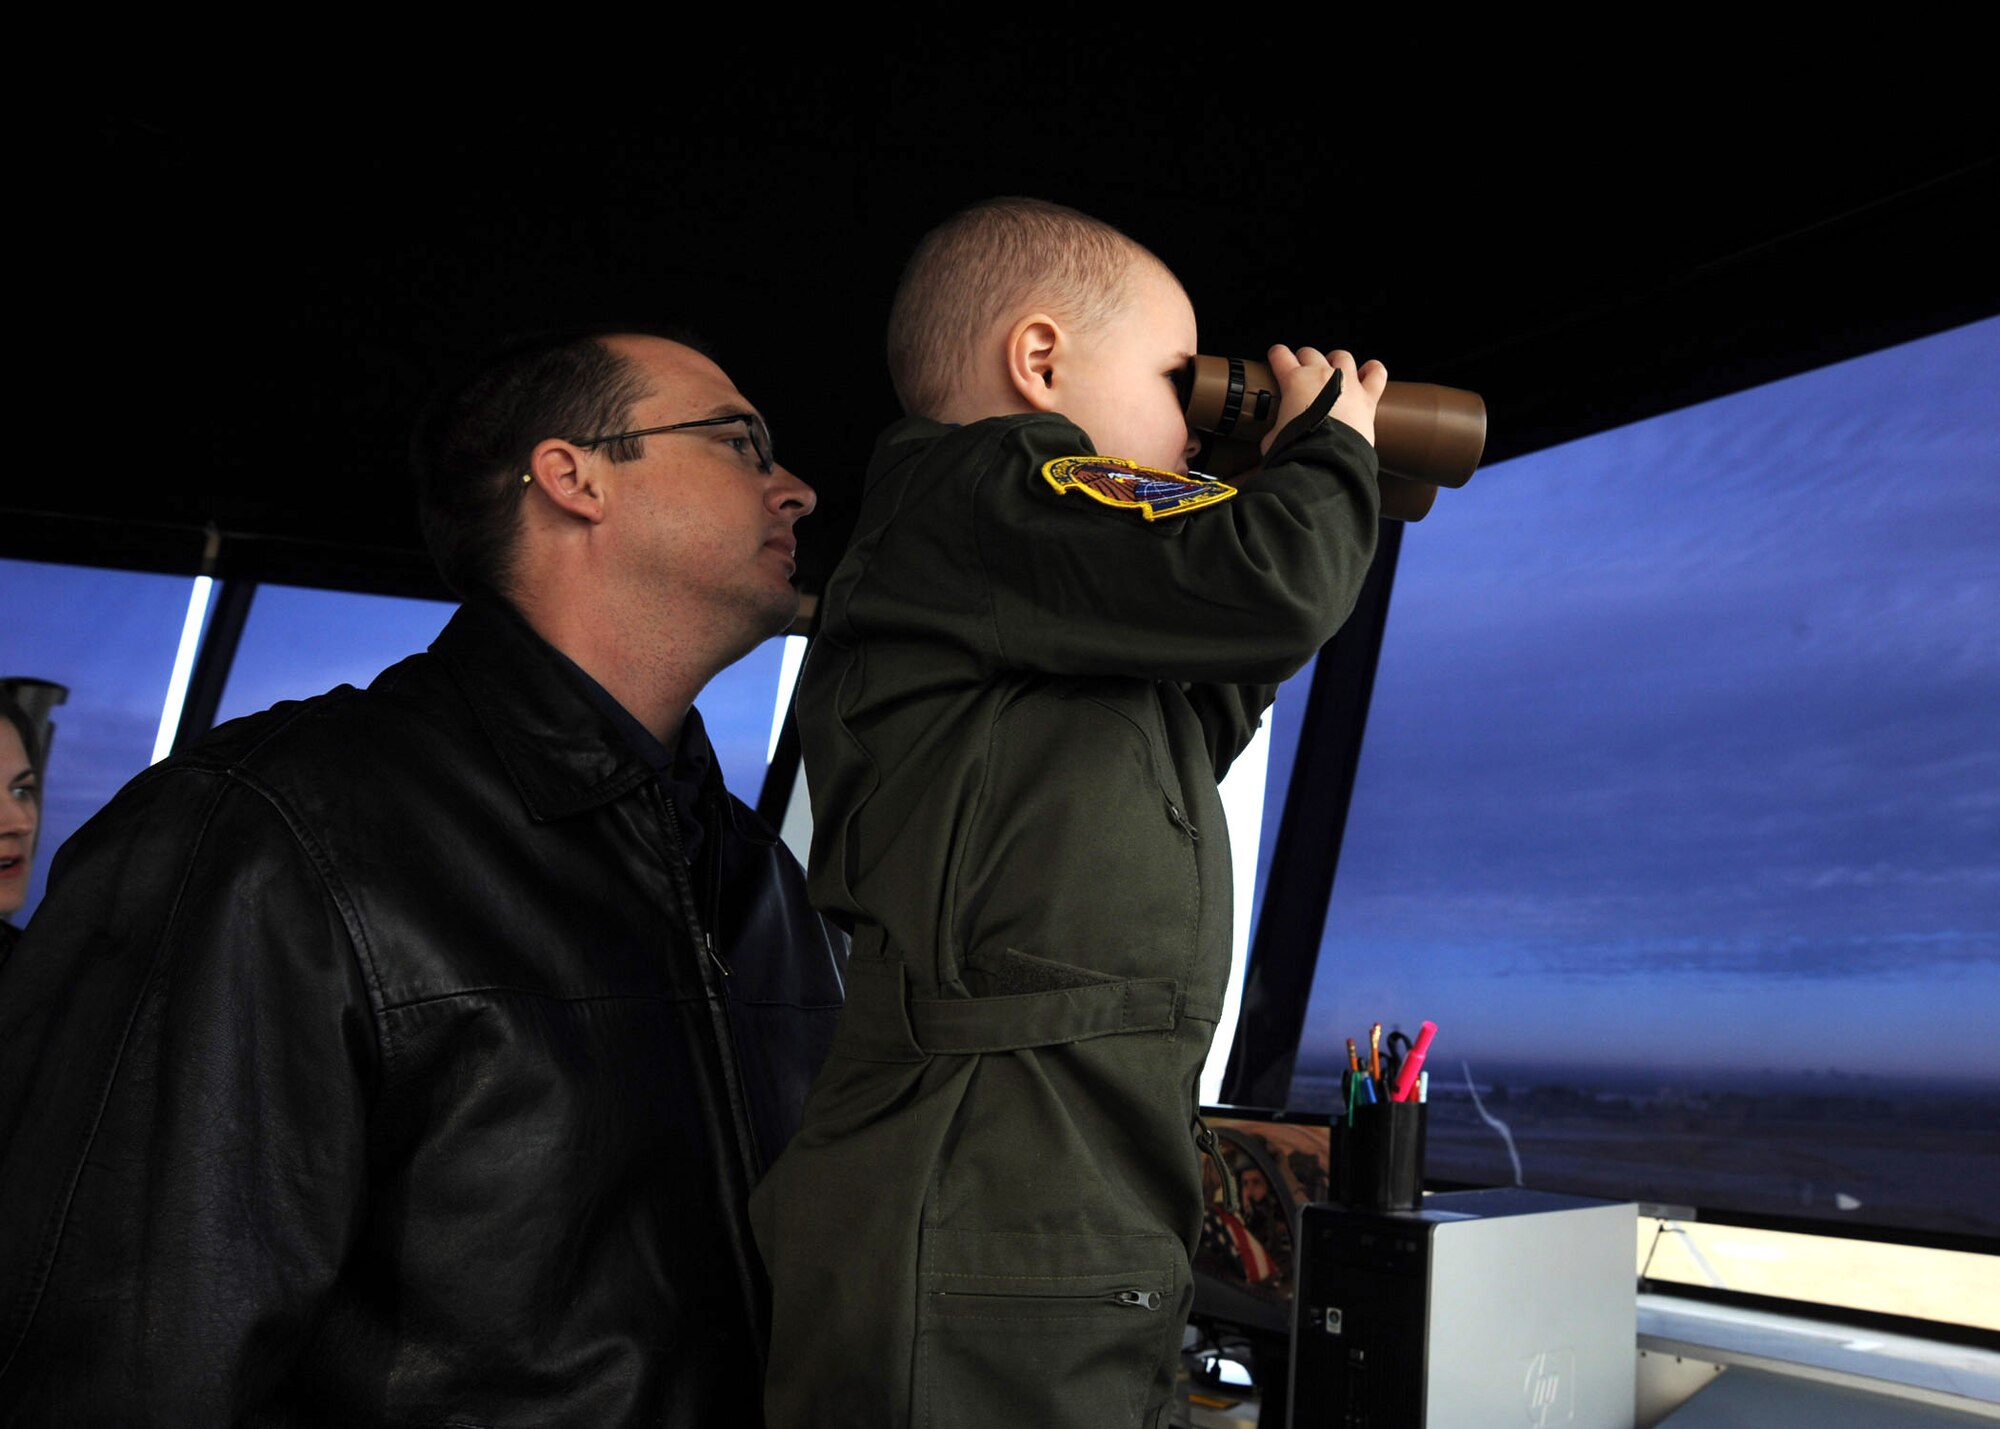 Five-year-old Joey Bacon, Pilot For a Day recipient, looks through a pair of binoculars with Jon Bacon, his father, during a tour of the air traffic control tower Dec. 10, 2010, McConnell Air Force Base, Kan. Joey, who has been diagnosed with leukemia, toured the base with members of the 22nd Operations Support Squadron as part of the Pilot for a Day program. Joey and his family were given a VIP tour of McConnell where they visited the base fire department, “flew” a KC-135 Stratotanker simulator, toured the air traffic control tower and met the military working dogs. (U.S. Air Force photo/Staff Sgt. Dallas Edwards)